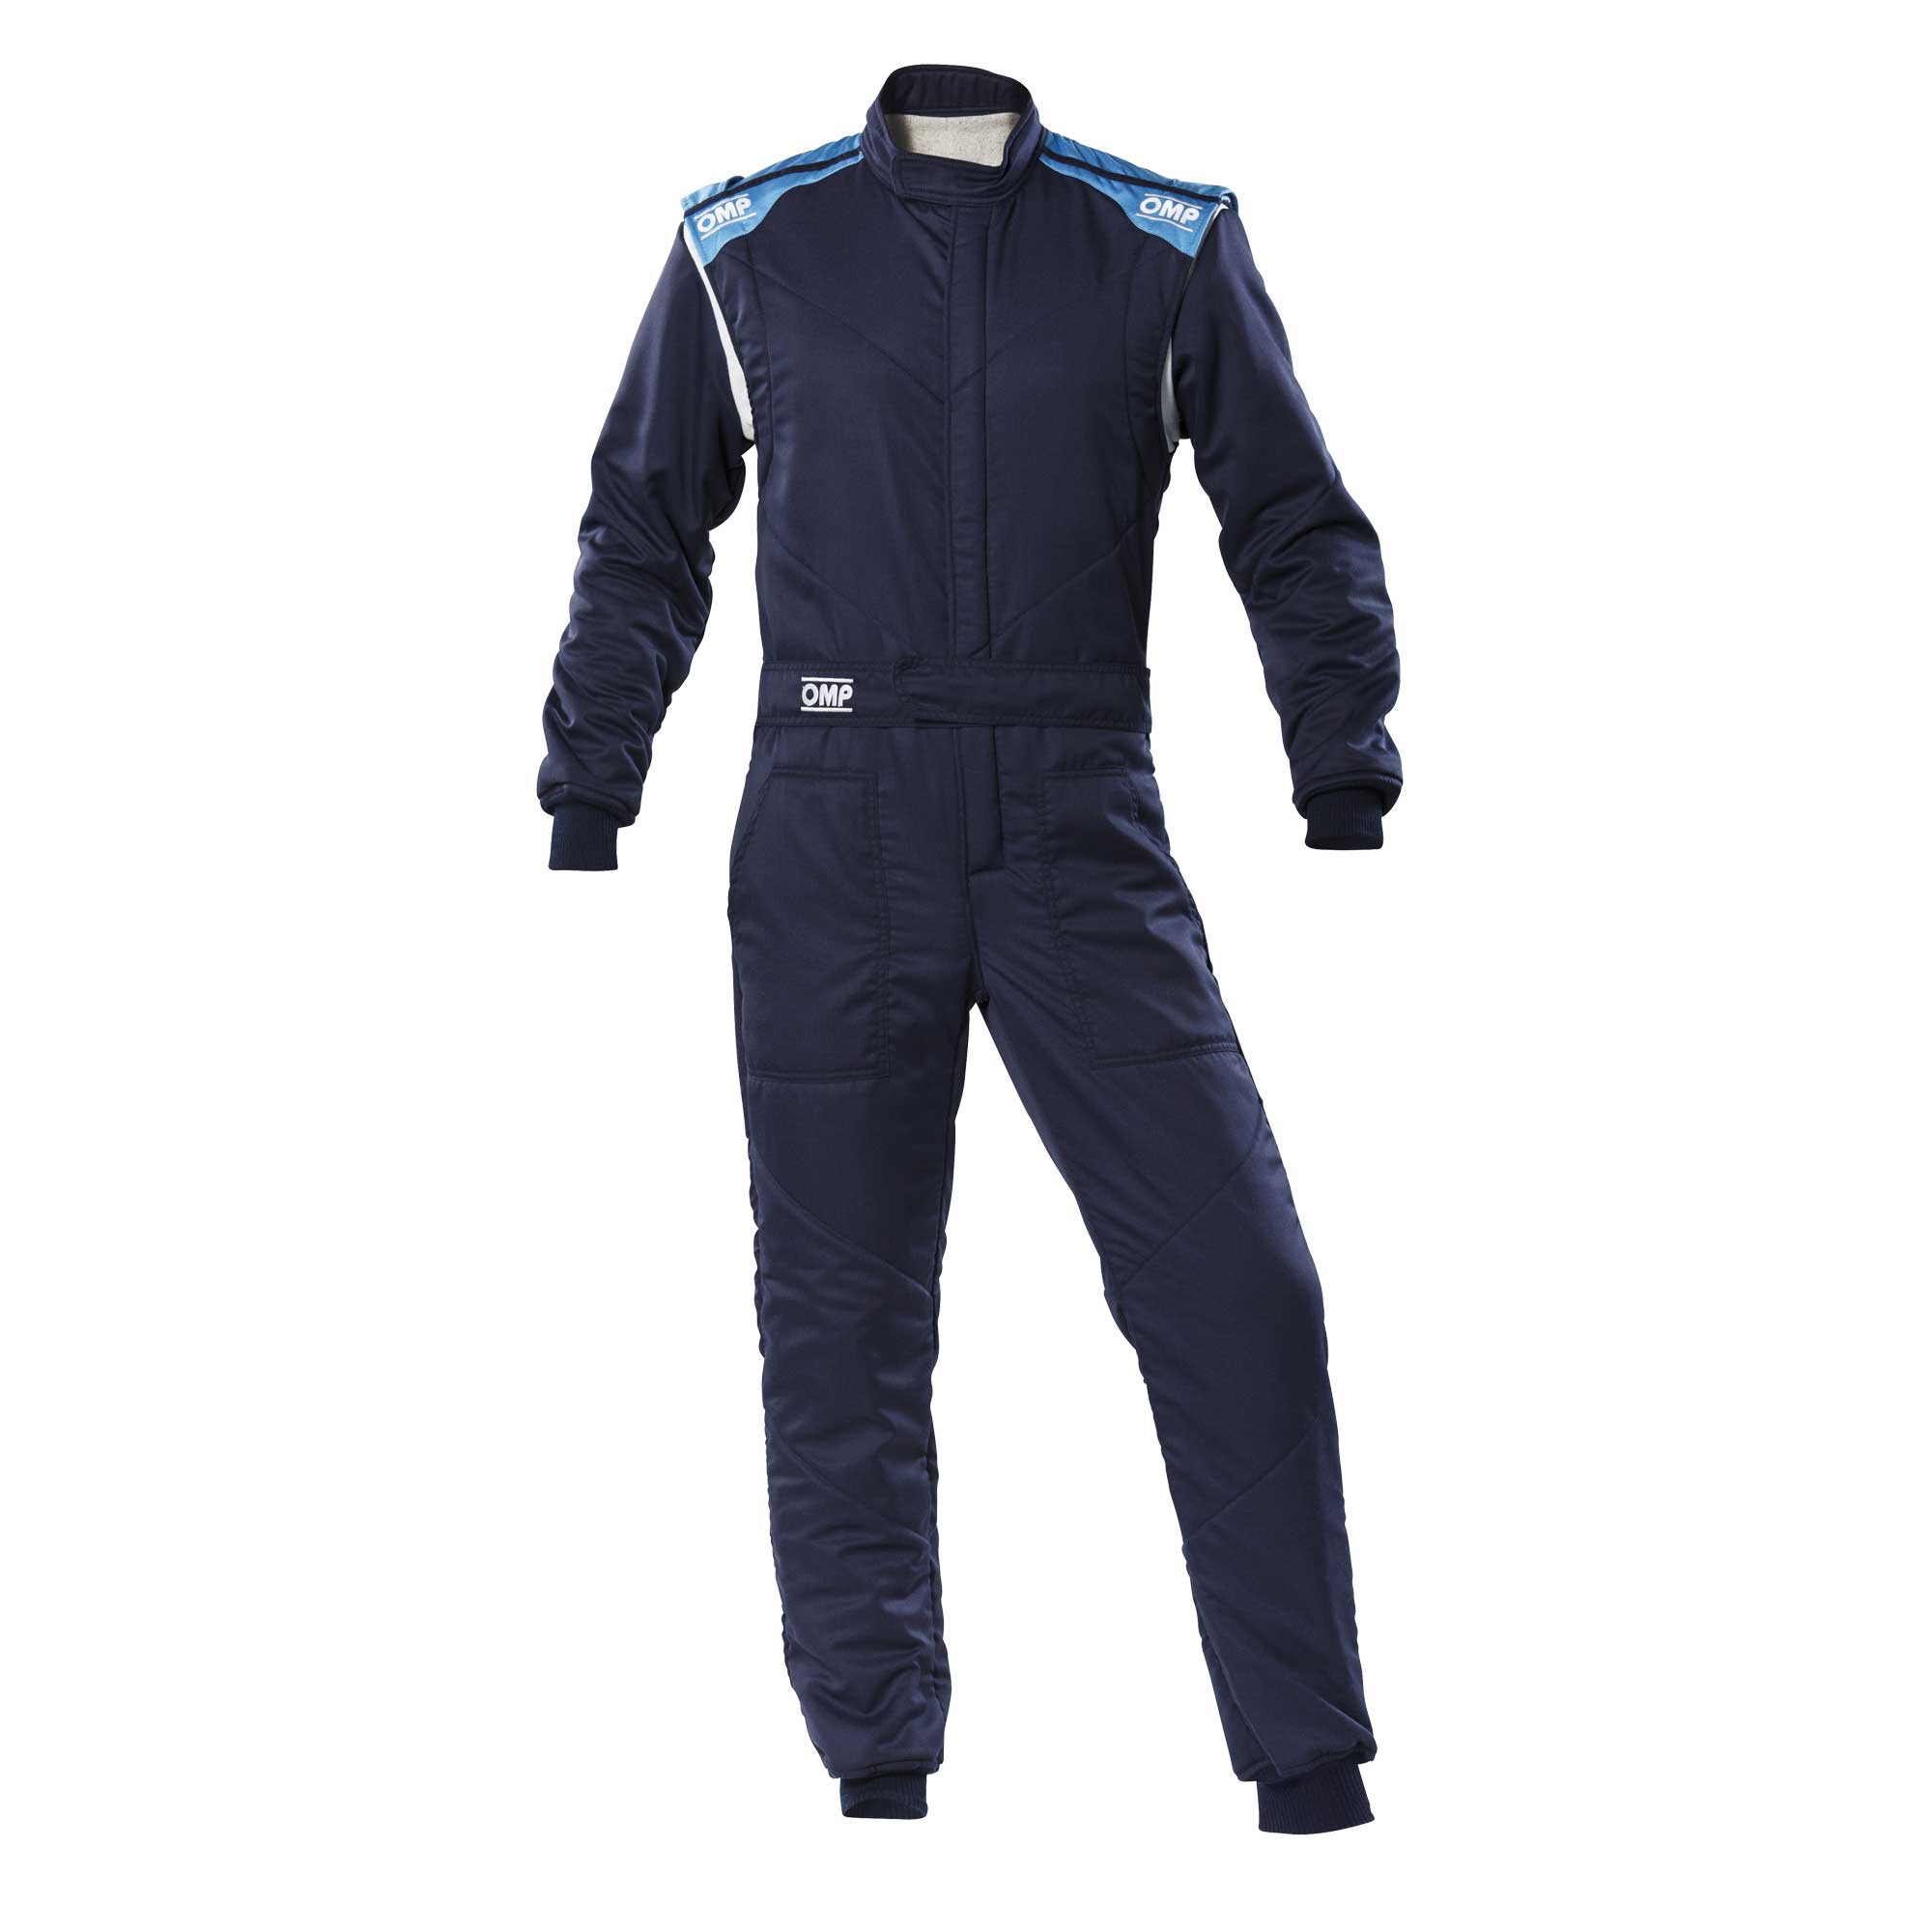 FIRST-S OVERALL NAVY BLUE/CYAN SIZE 44 FIA 8856-2018